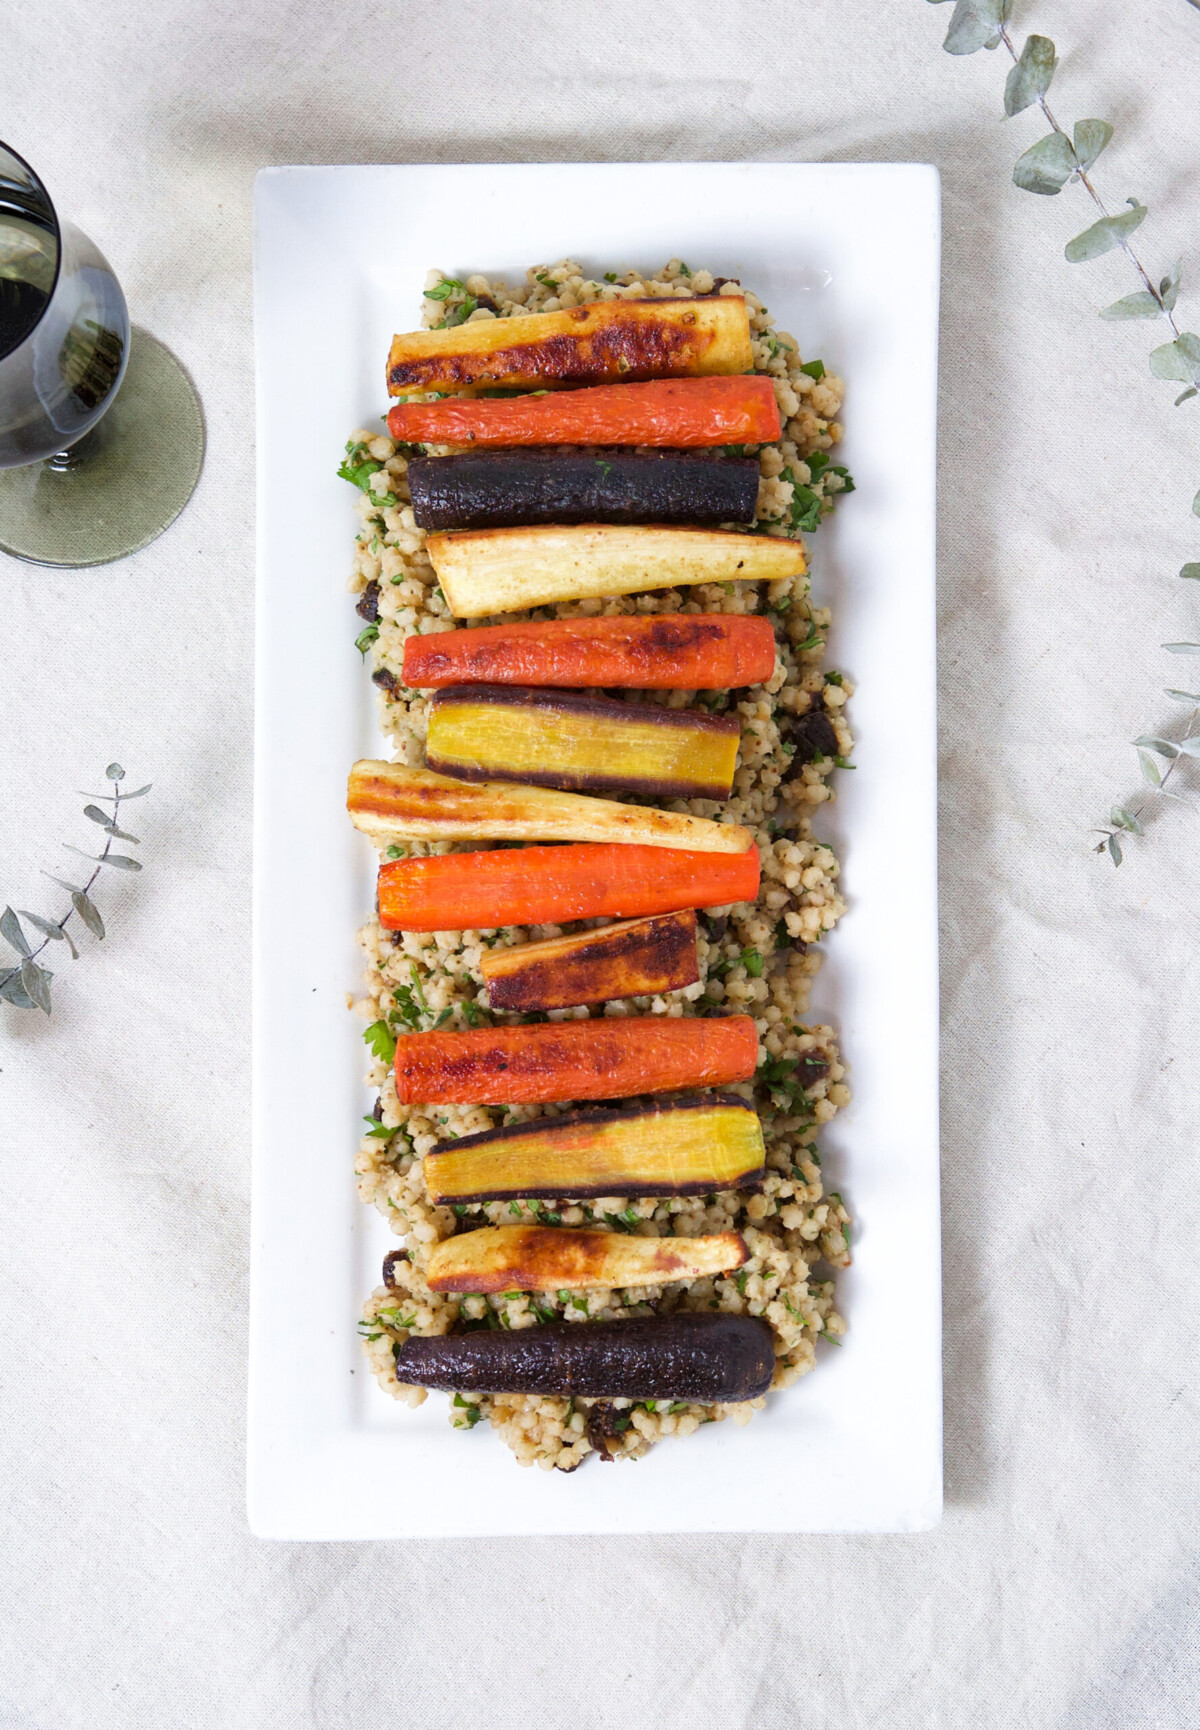 Roasted Root Vegetables & Sorghum Pilaf with Tahini Sauce | Zestful Kitchen